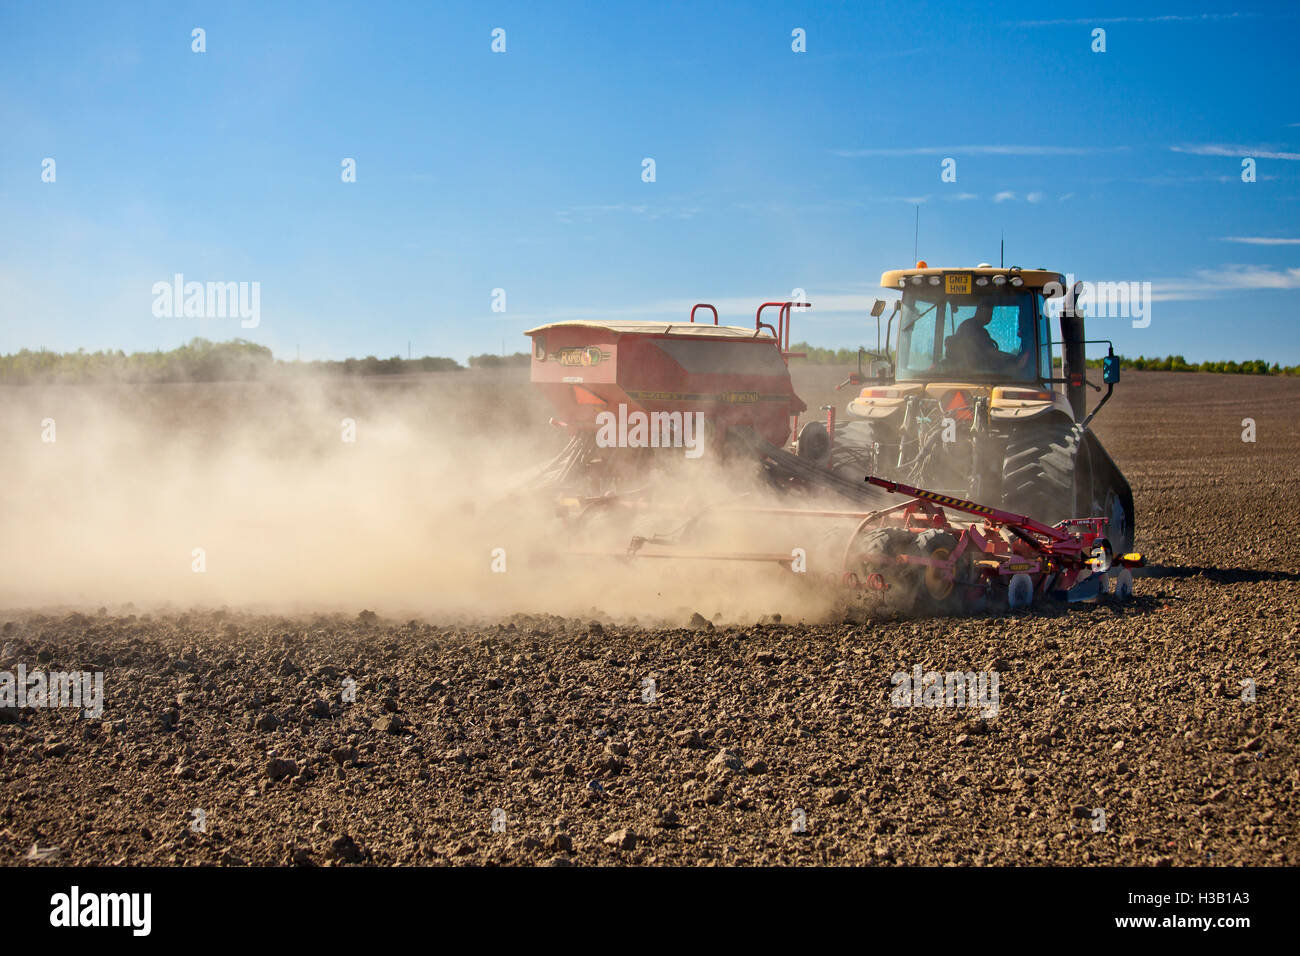 Tractor sowing seed. Stock Photo